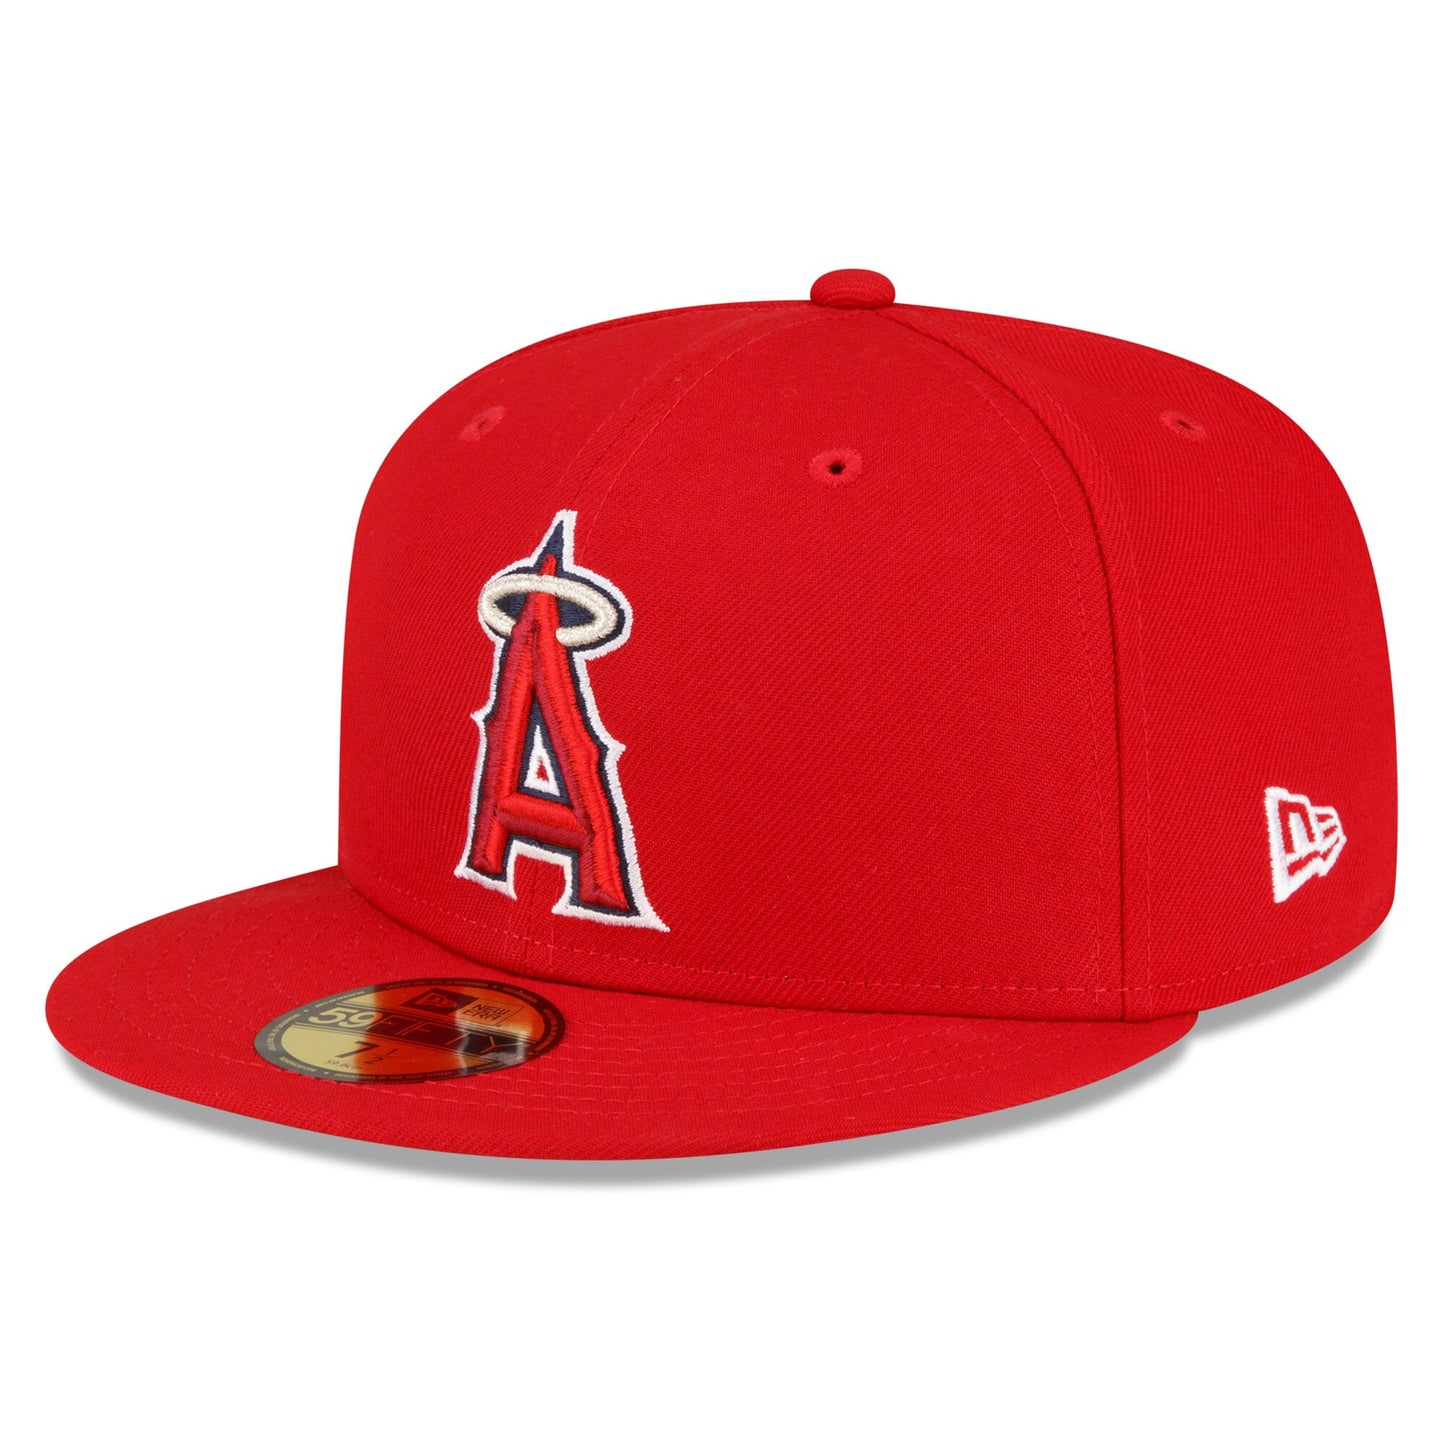 Los Angeles Angels New Era Authentic Collection Replica 59FIFTY Fitted Hat - Red